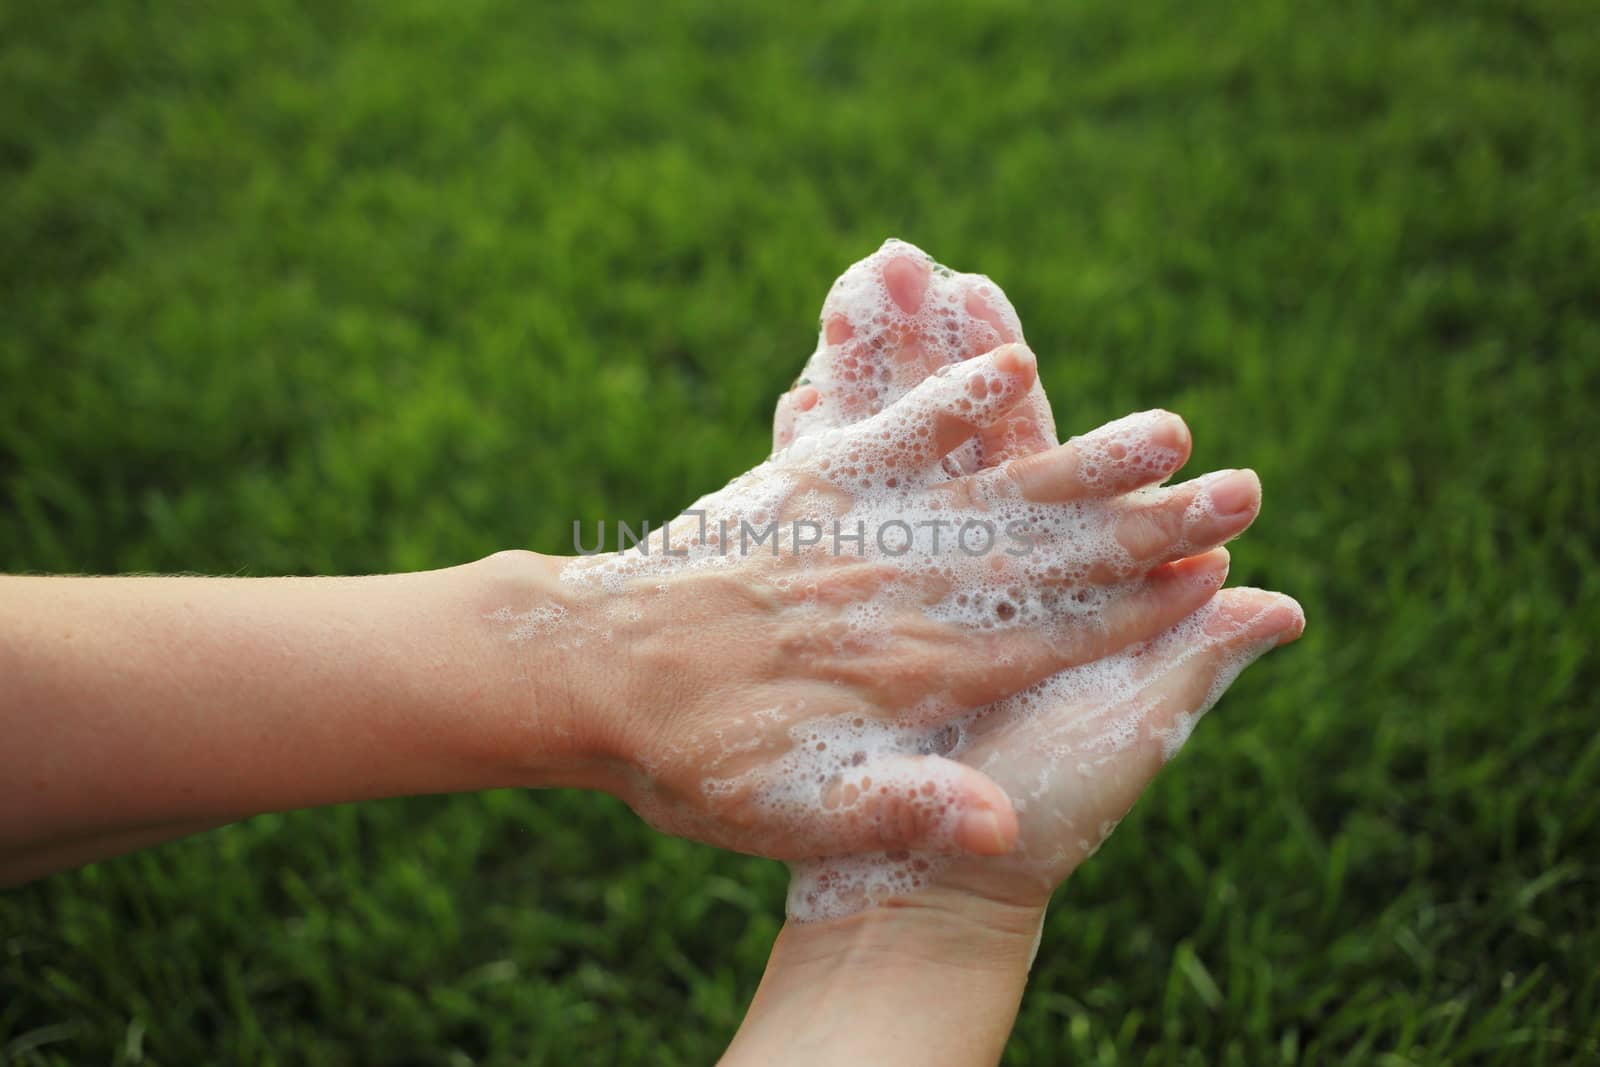 Washing hands rubbing with soap man for corona virus prevention, hygiene to stop spreading coronavirus. Death to germs. You need to make sure that microbes have a zero chance. High quality photo